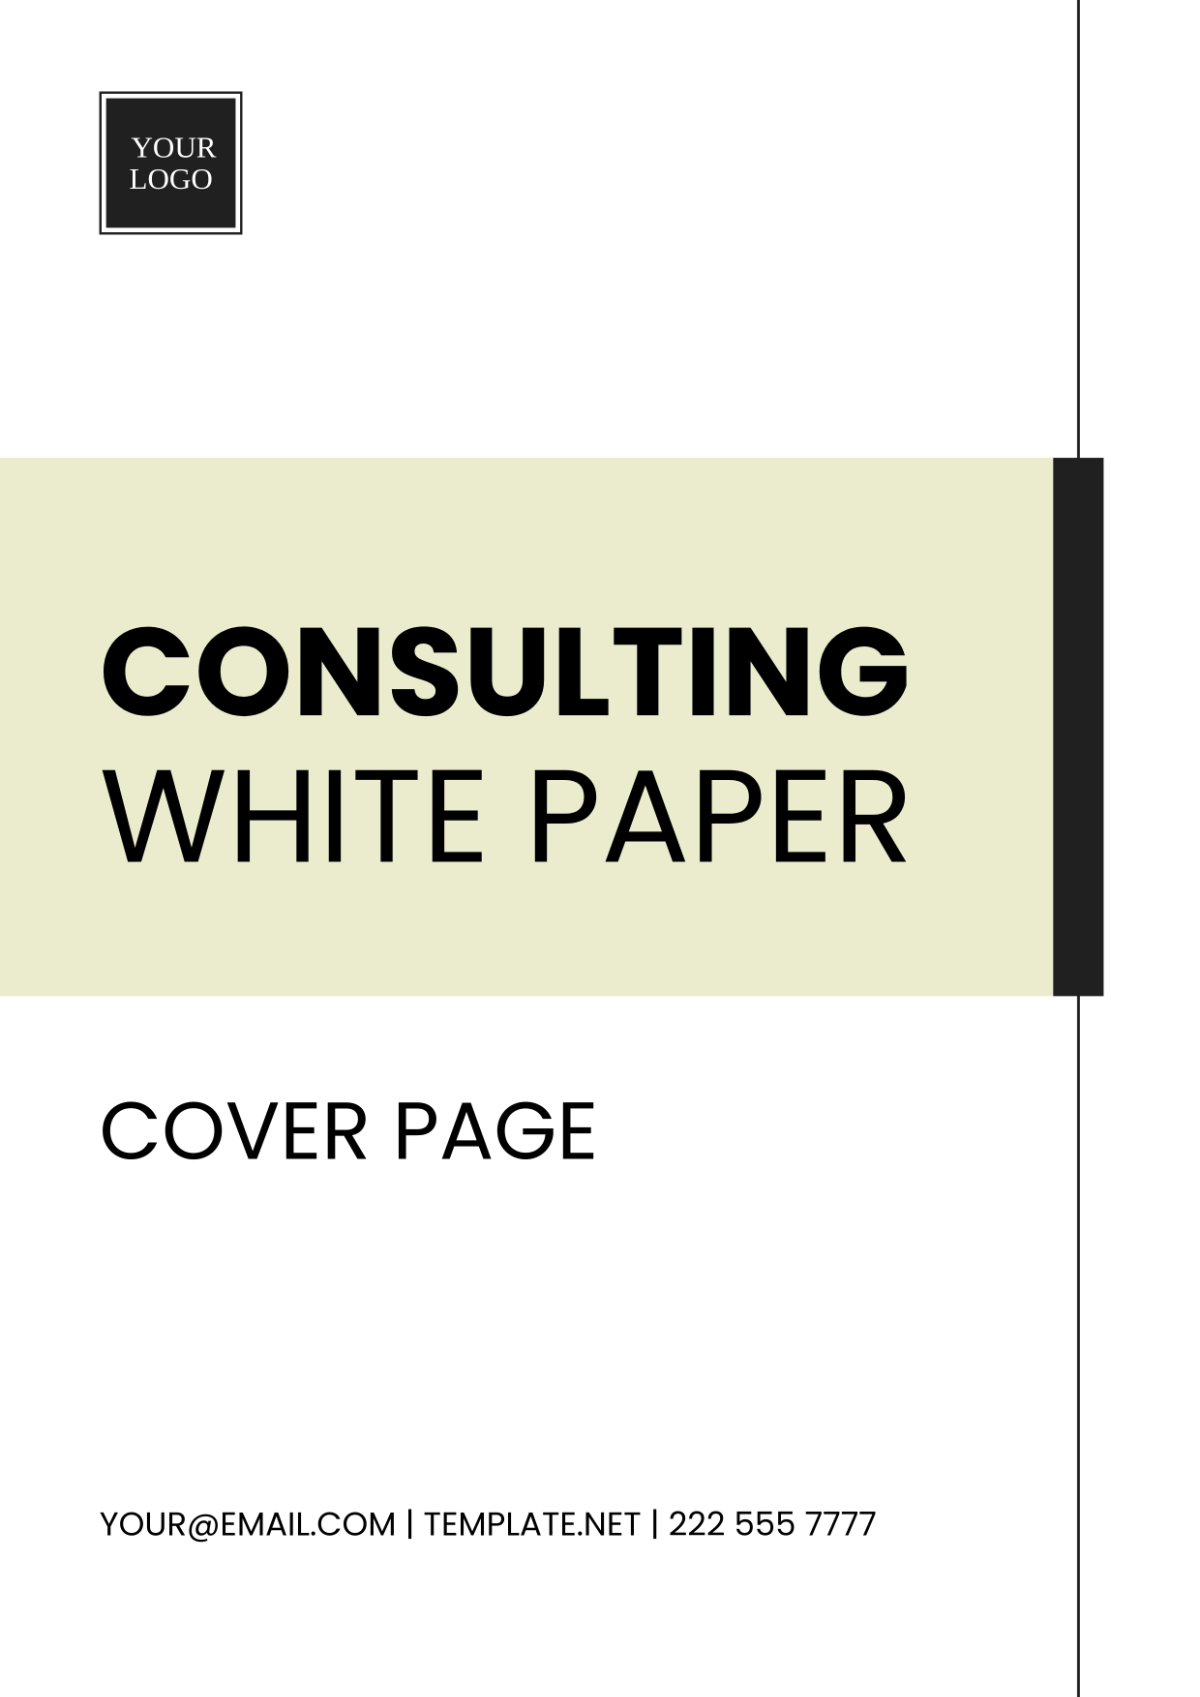 Consulting White Paper Cover Page Template